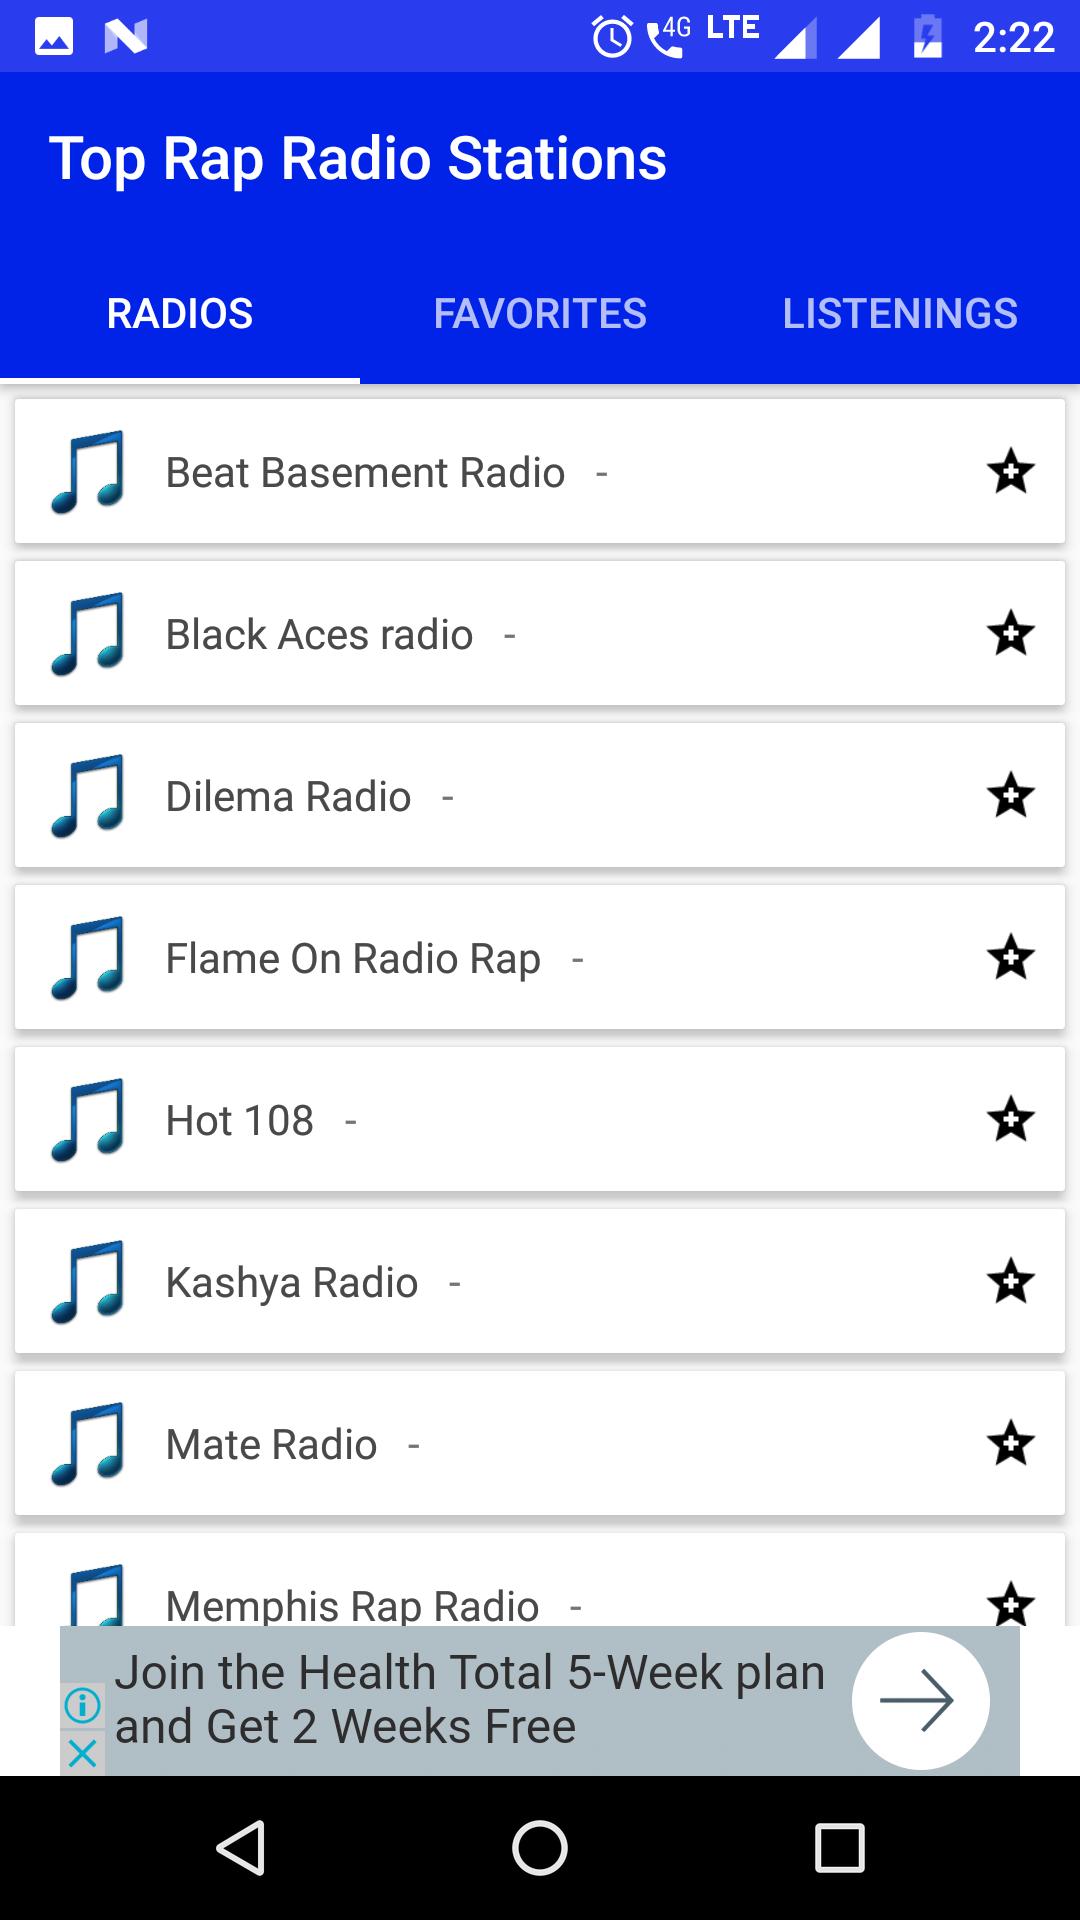 Top Rap Radio Stations for Android - APK Download